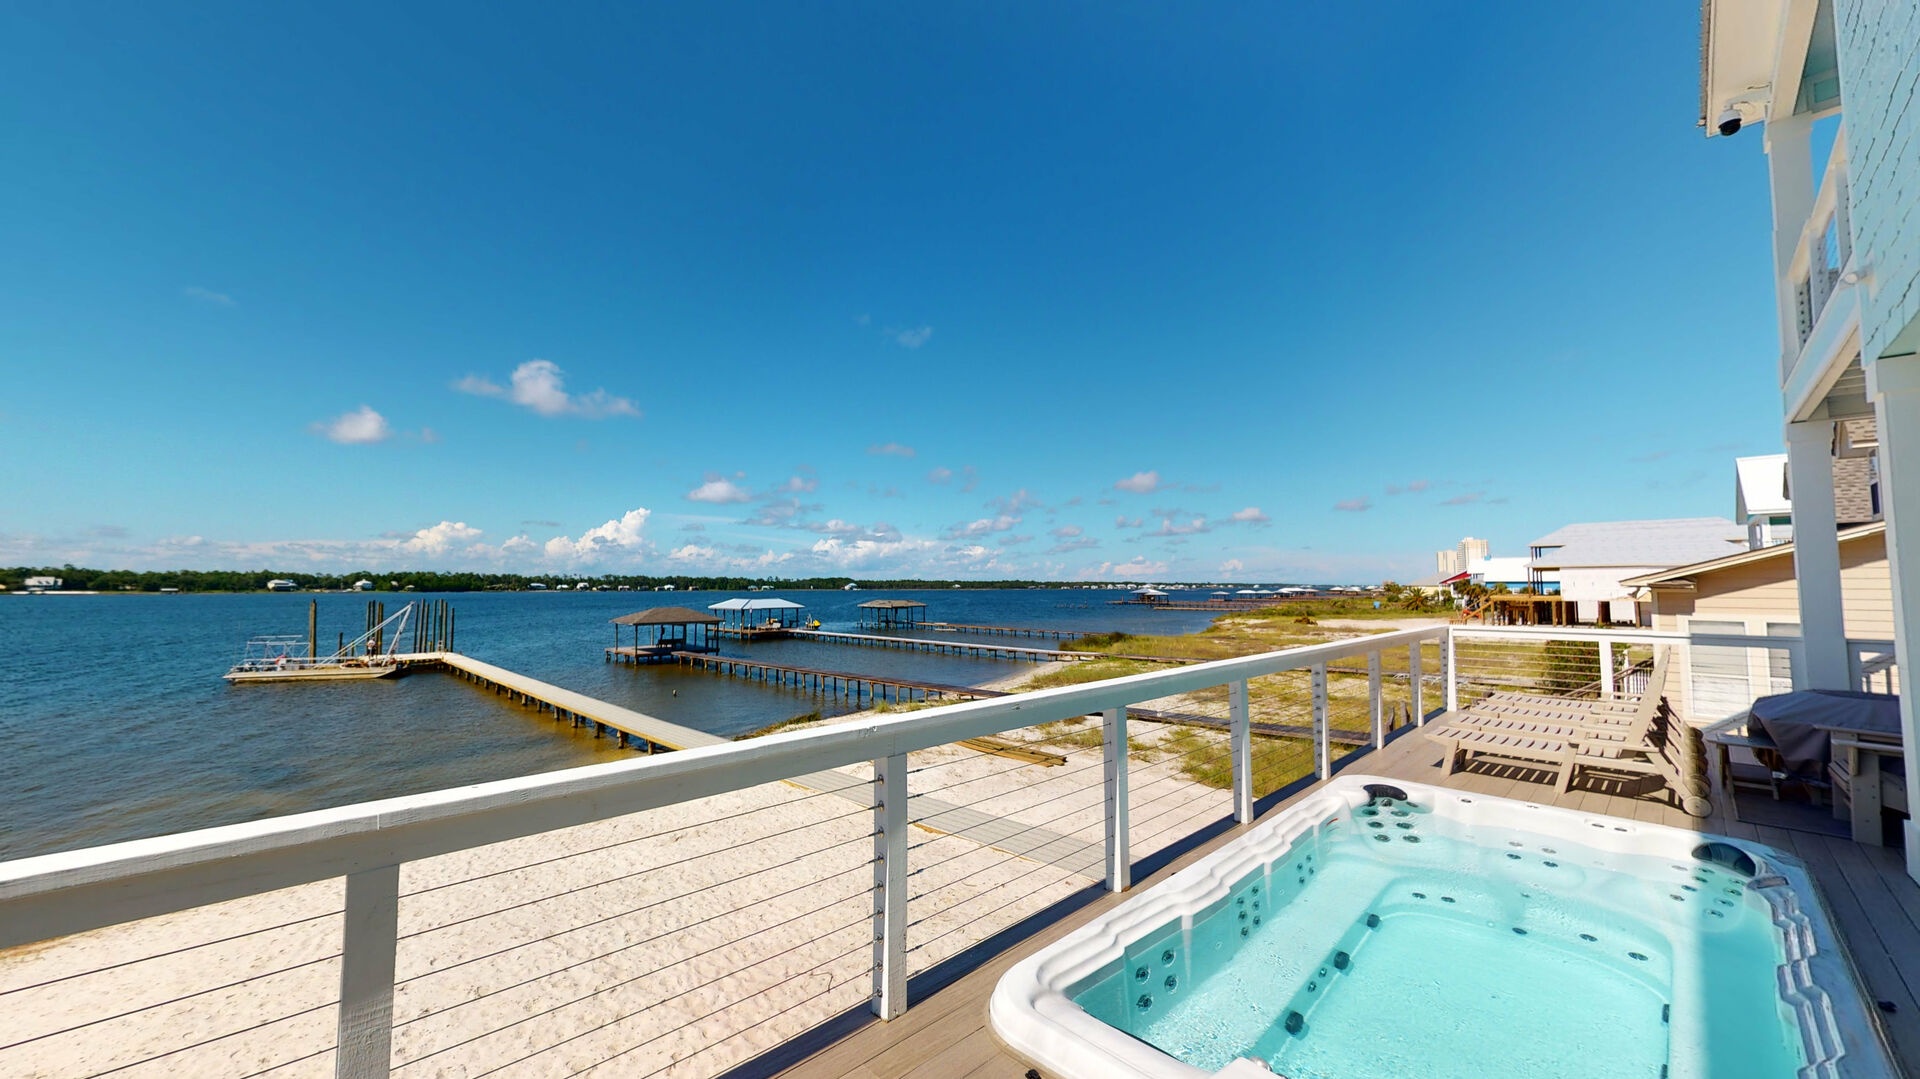 Guests have access to a private swim spa year round and fantastic views